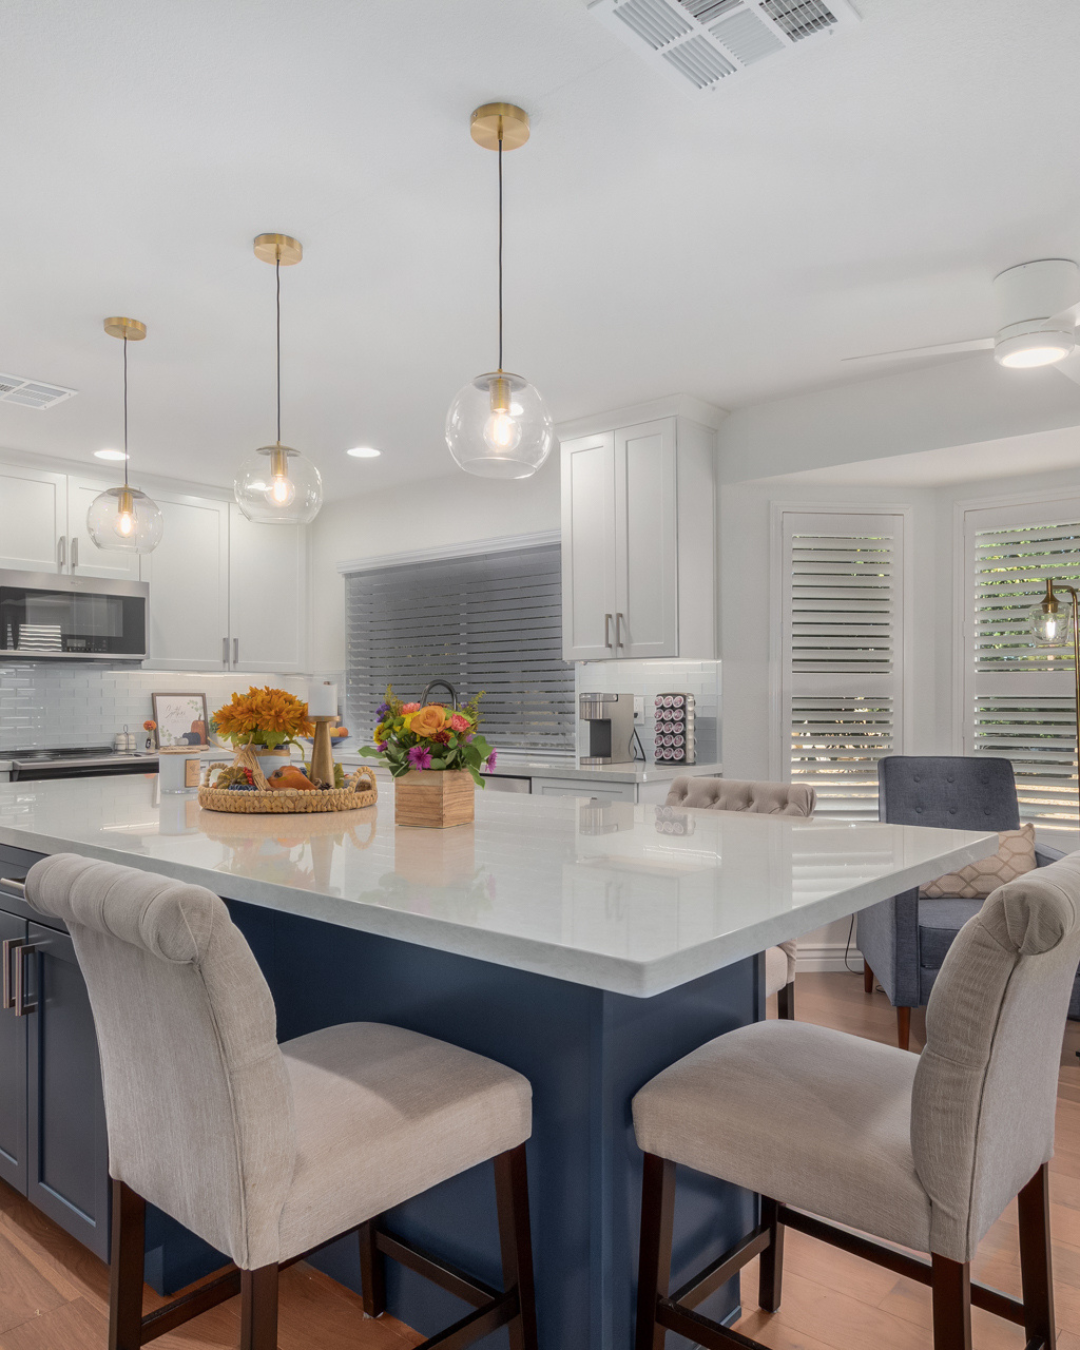 How Much Does It Cost to Remodel a Kitchen in Scottsdale?